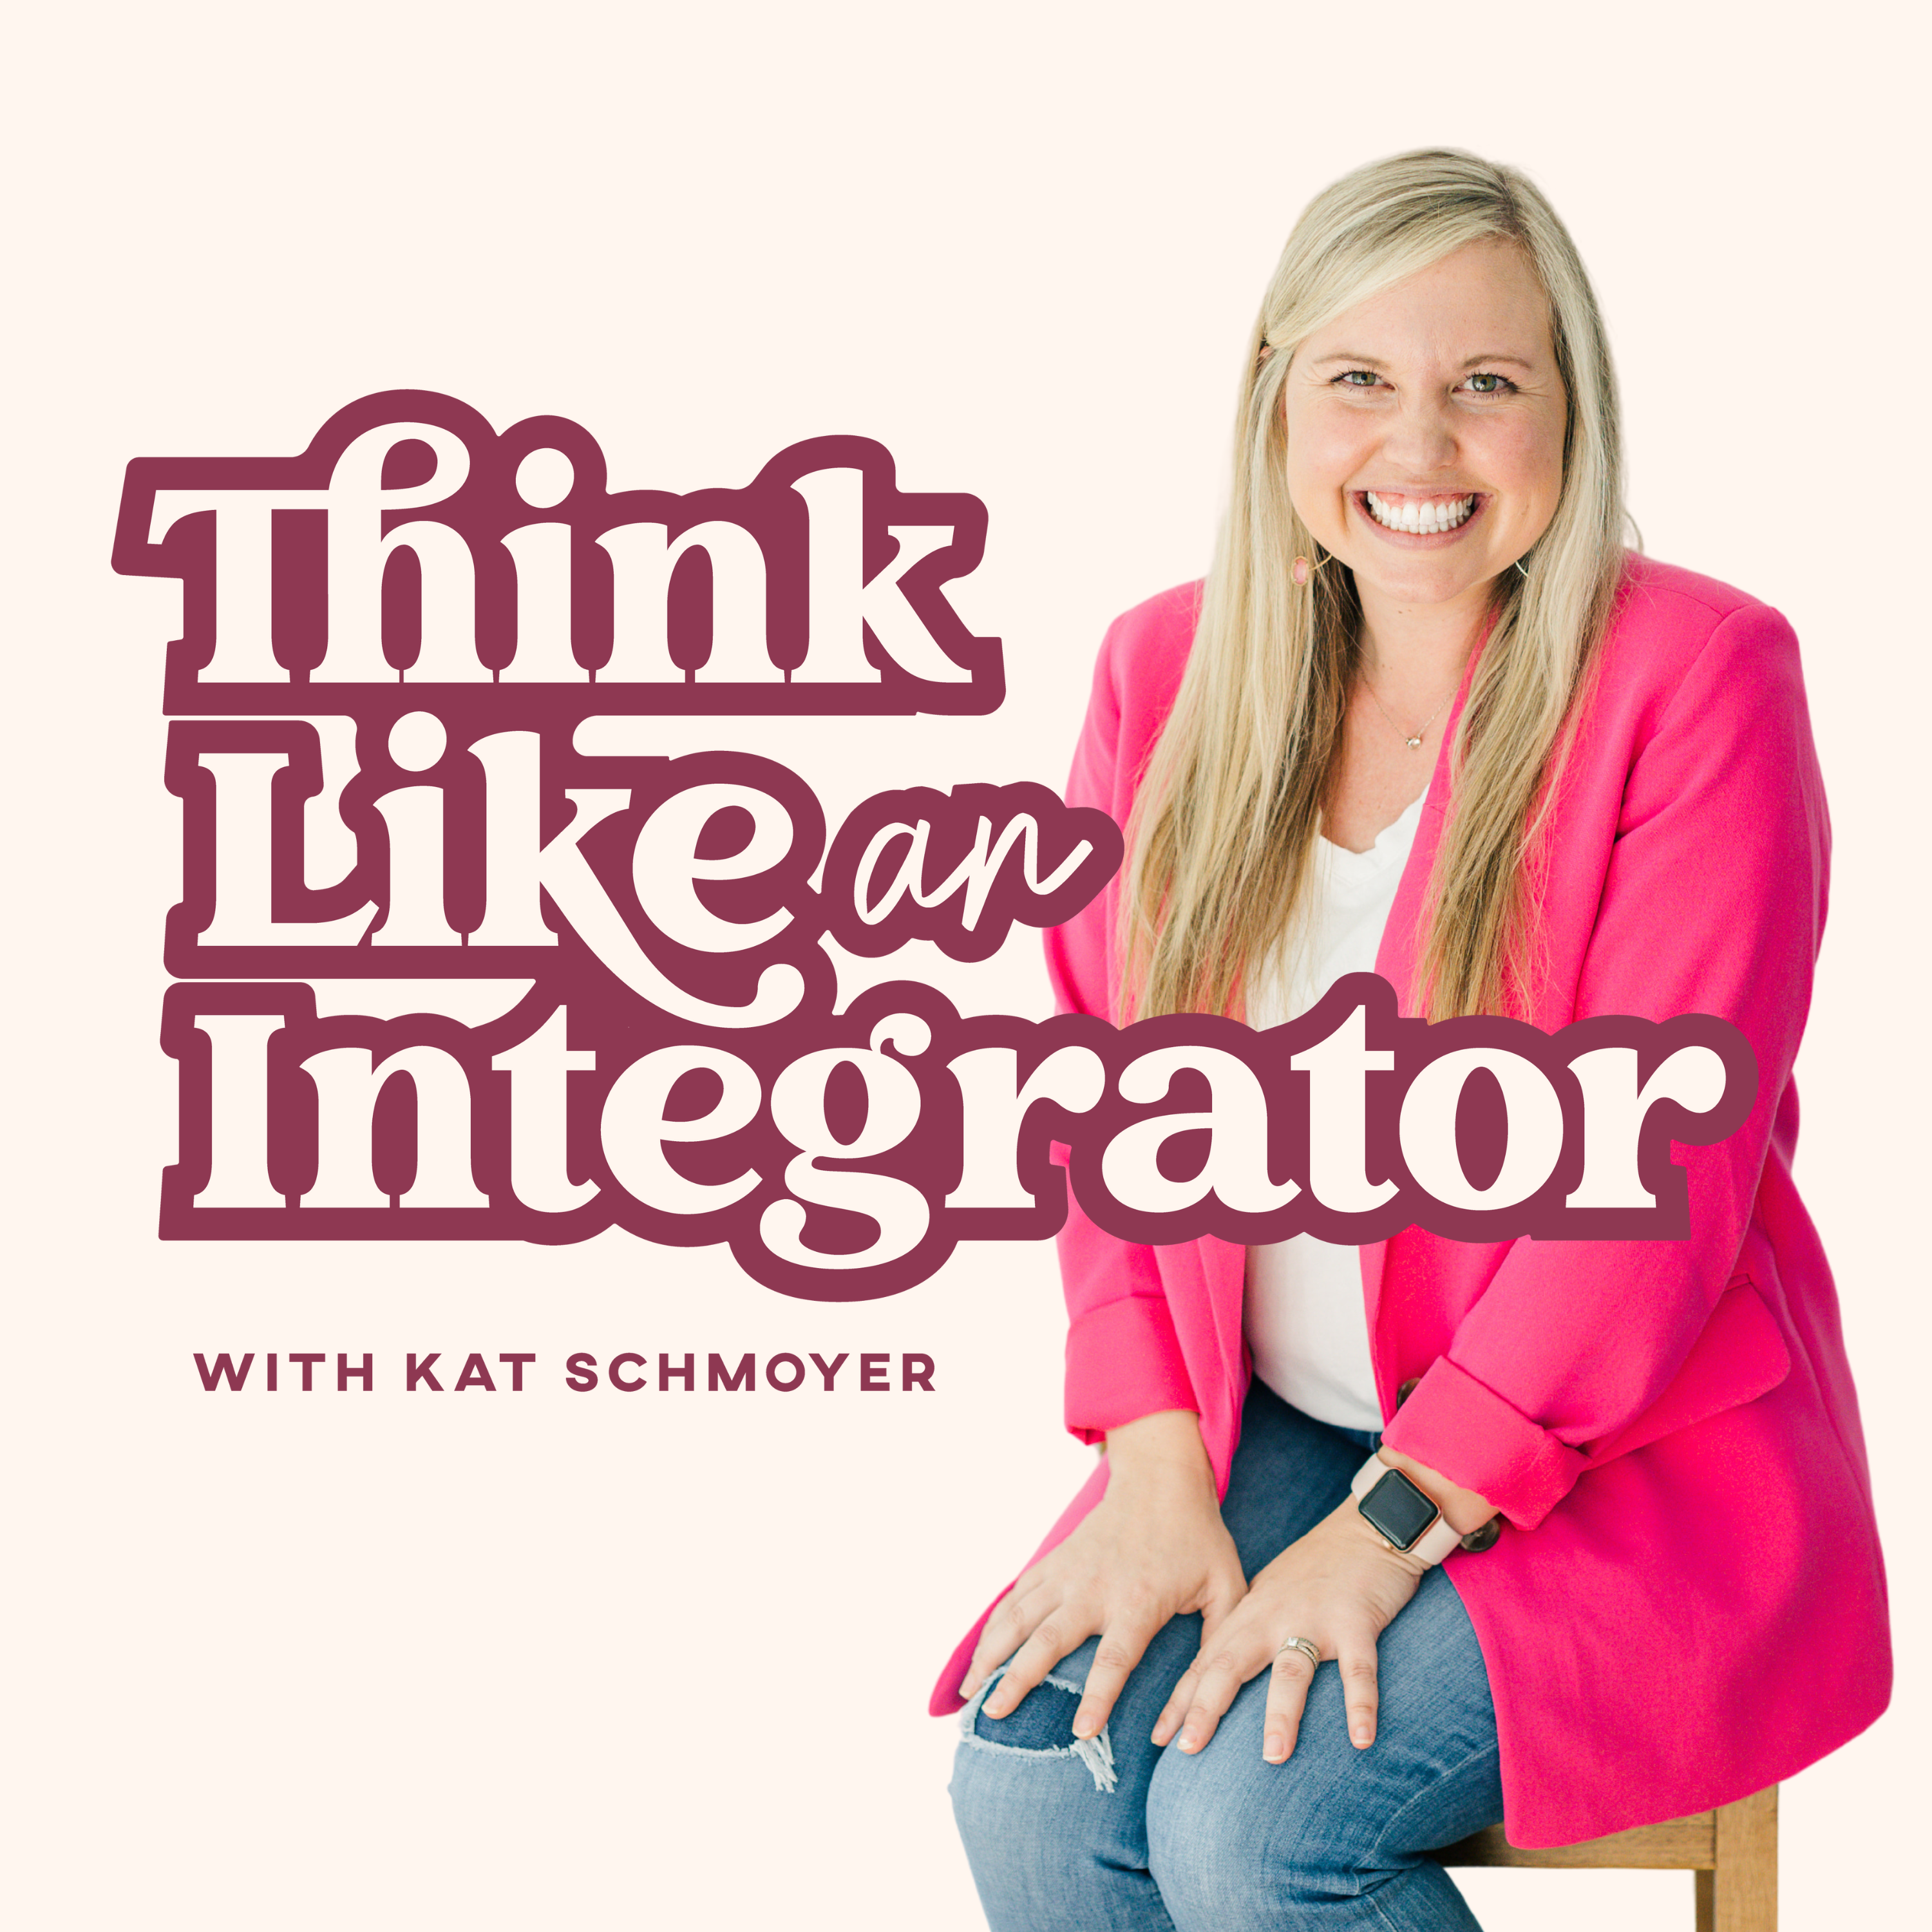 What’s an Integrator? What’s a Visionary? What are the different types of Integrators… and how do you know if you need one?